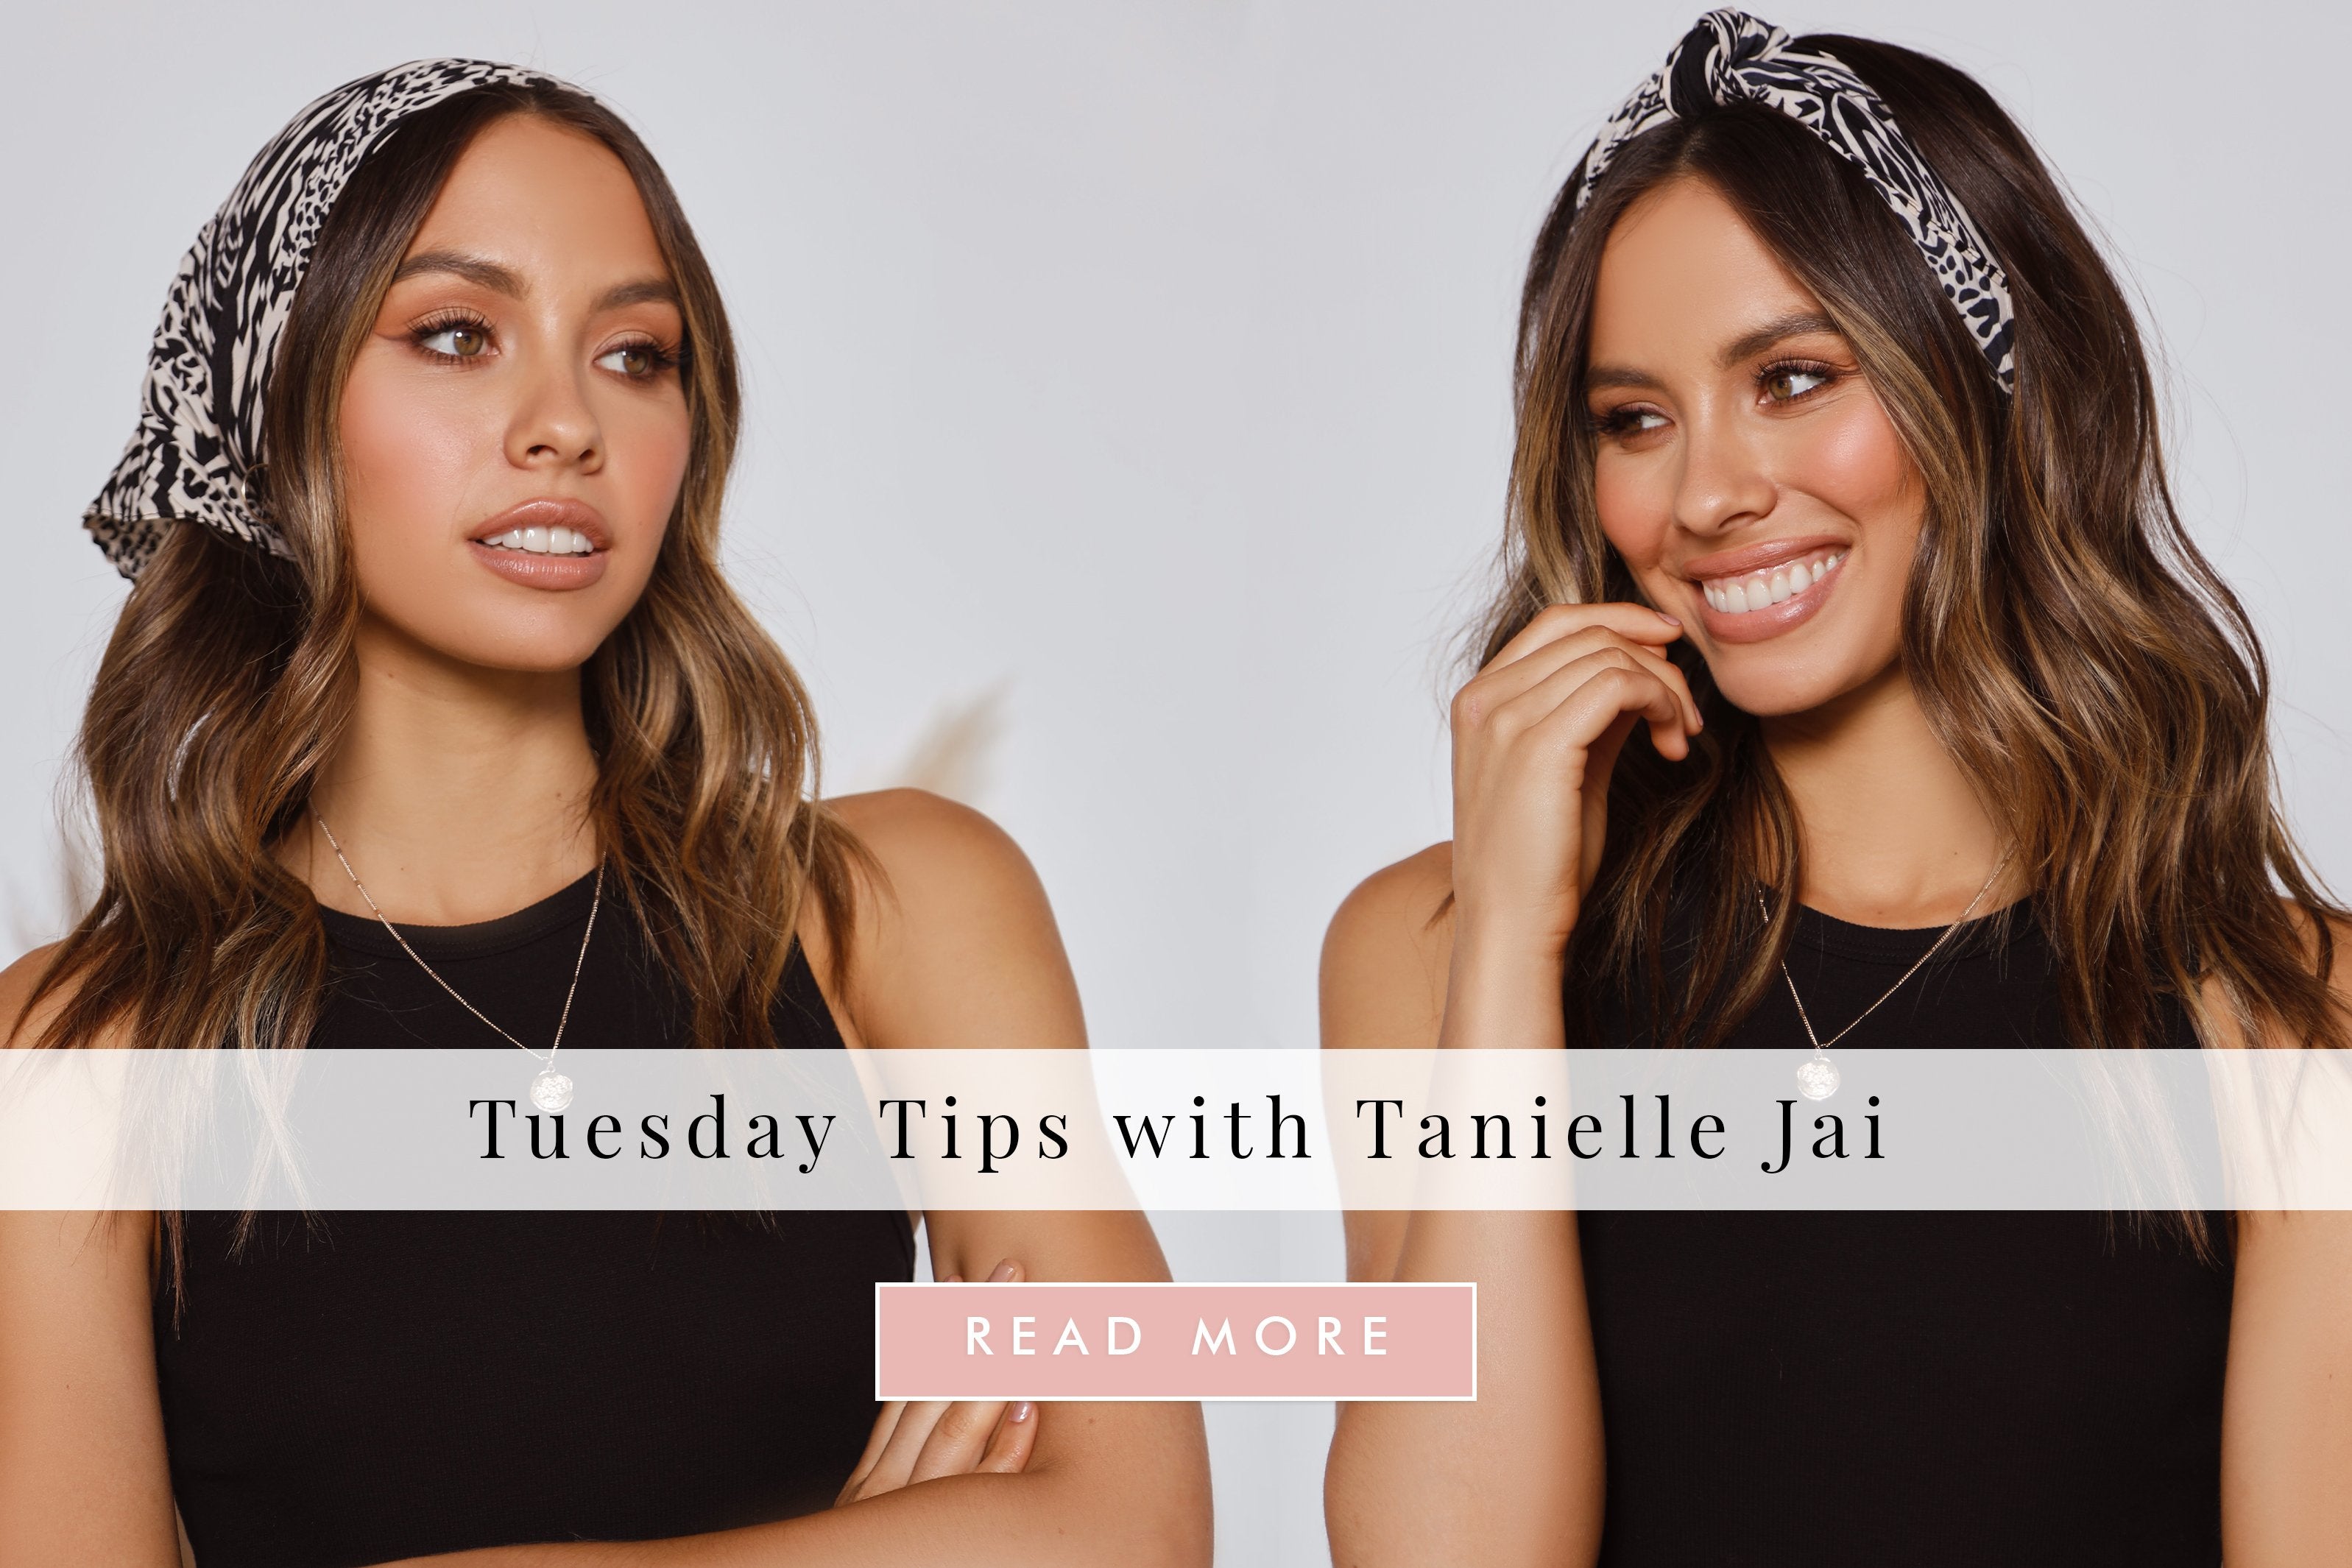 TUESDAY TIPS WITH HAIR AND MAKEUP ARTIST TANIELLE JAI